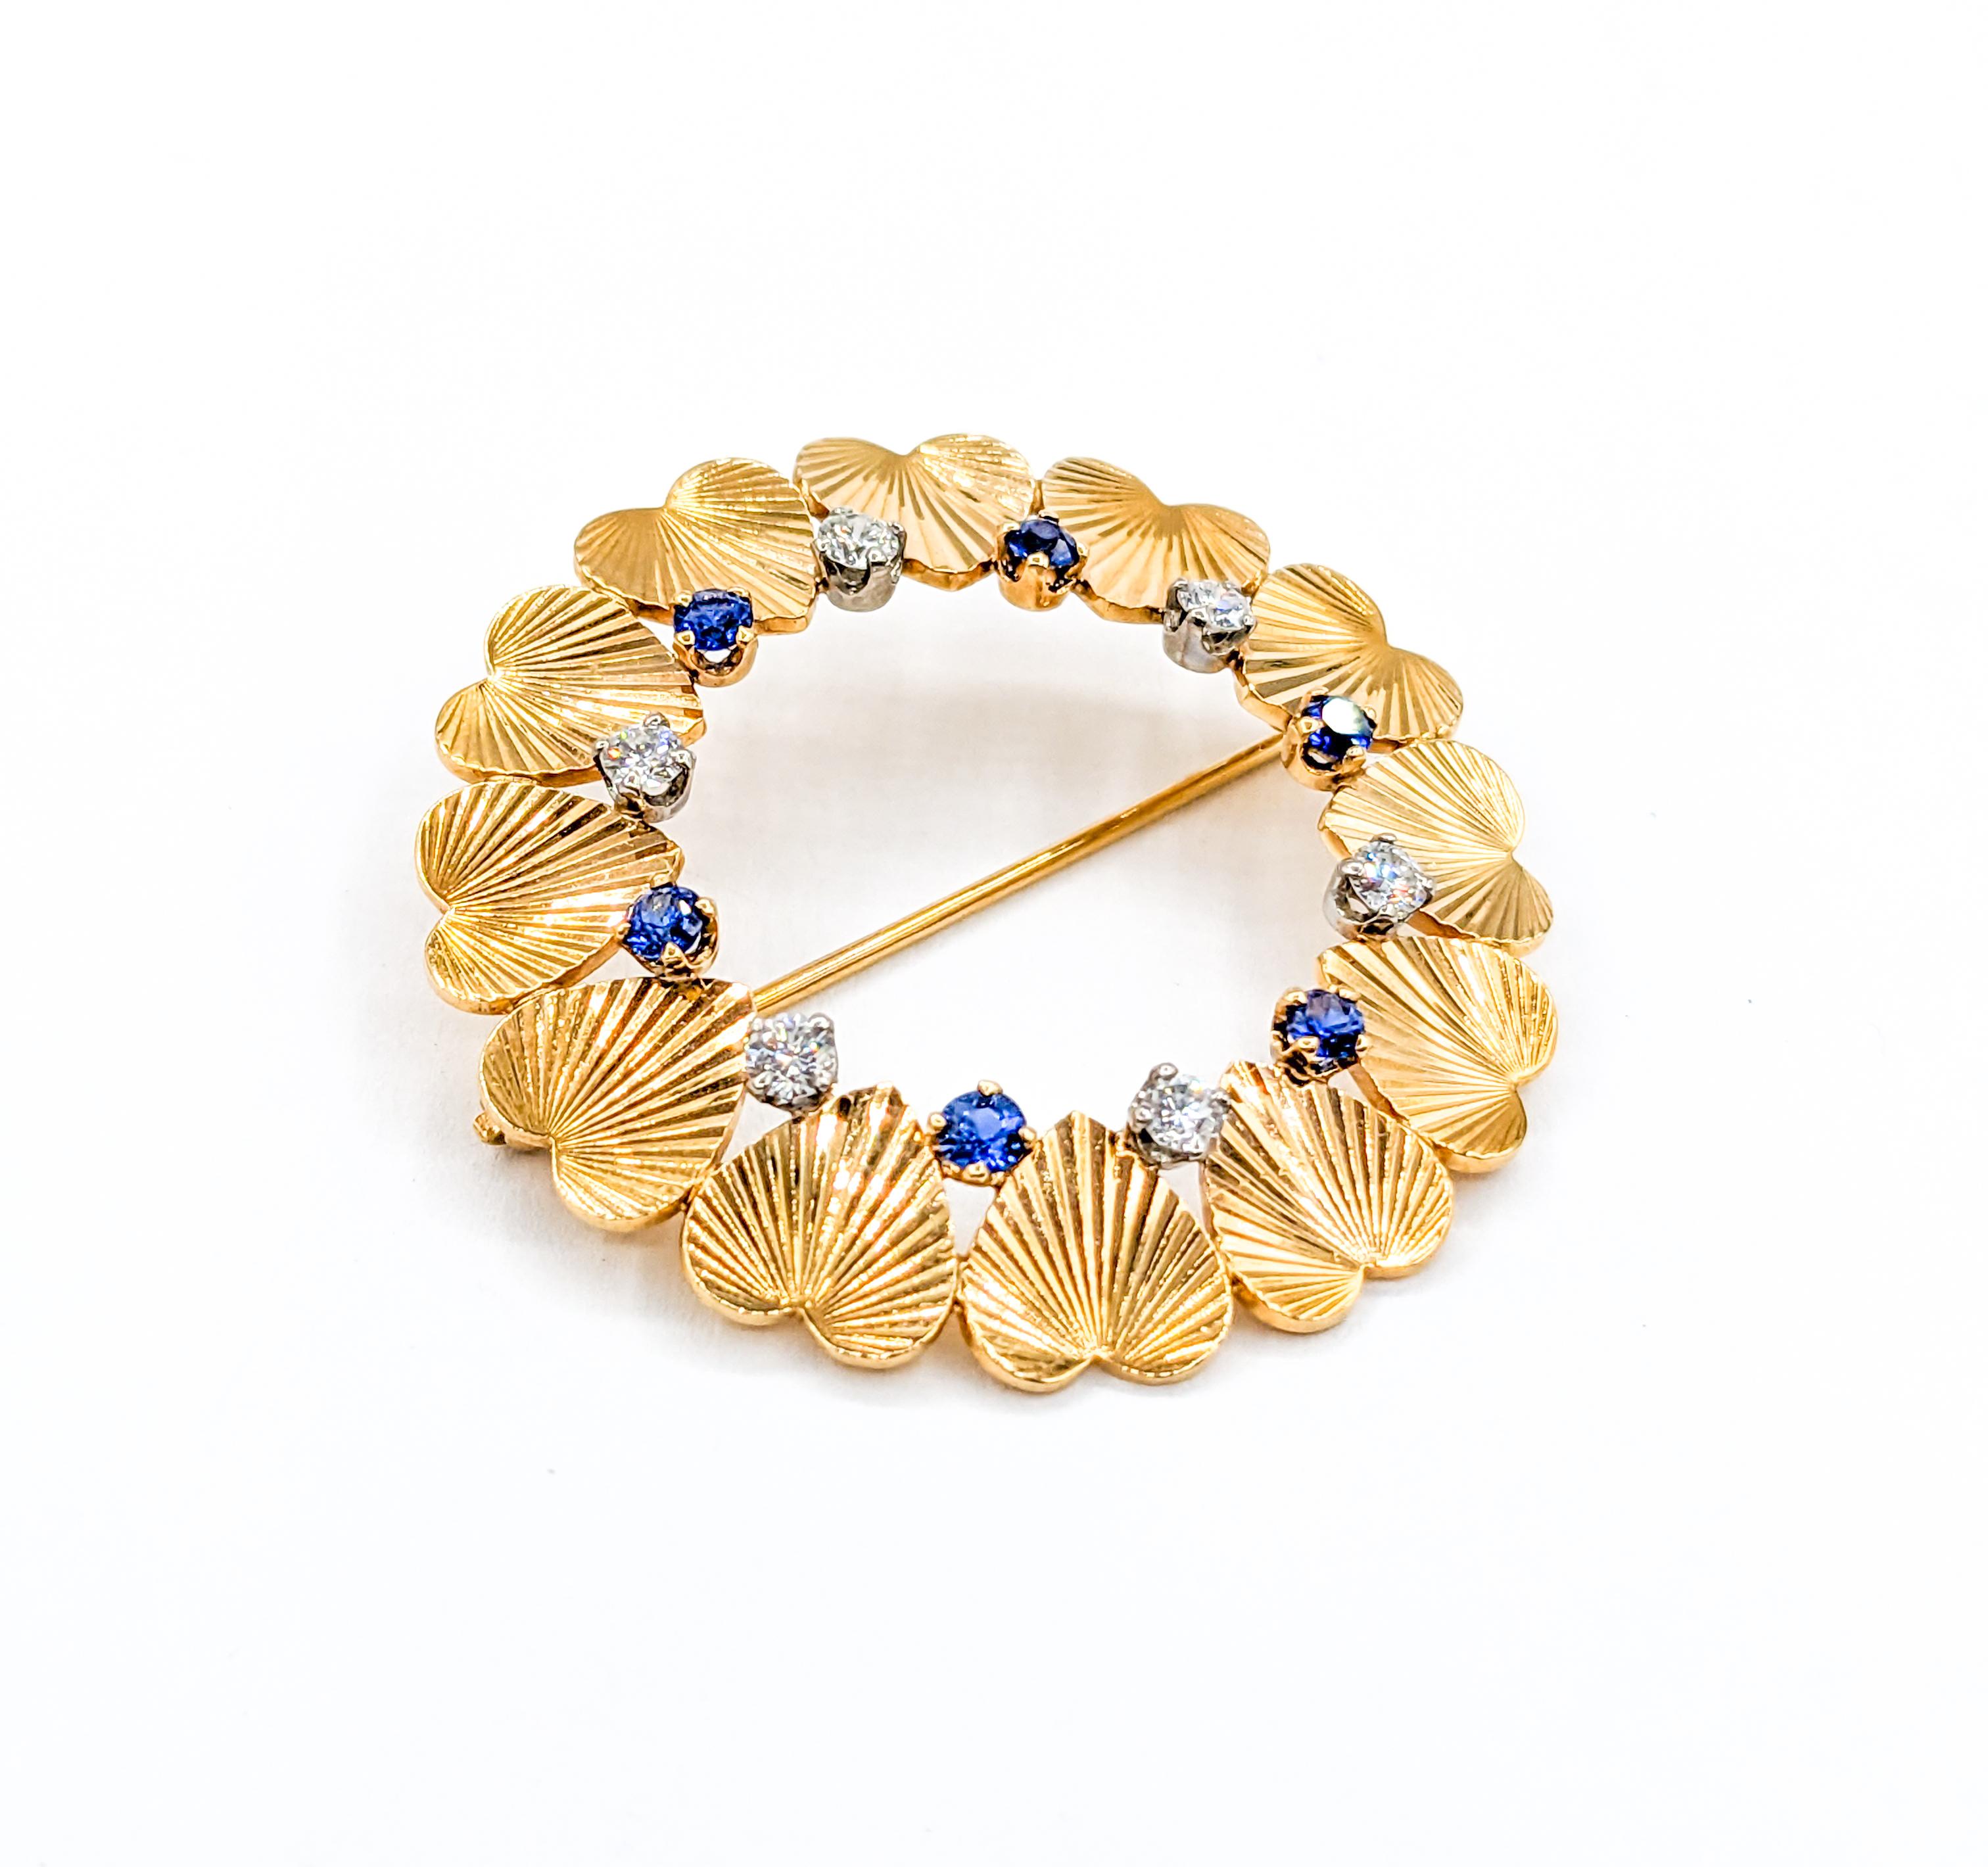 Wonderful Mid-Century Diamond & Sapphire Heart Brooch in 14K Gold

Fall in love with this exquisite Mid-Century Heart Wreath Brooch, finely crafted in bright 14k yellow gold. The hearts are expertly engine turned, enhancing the beautiful textural